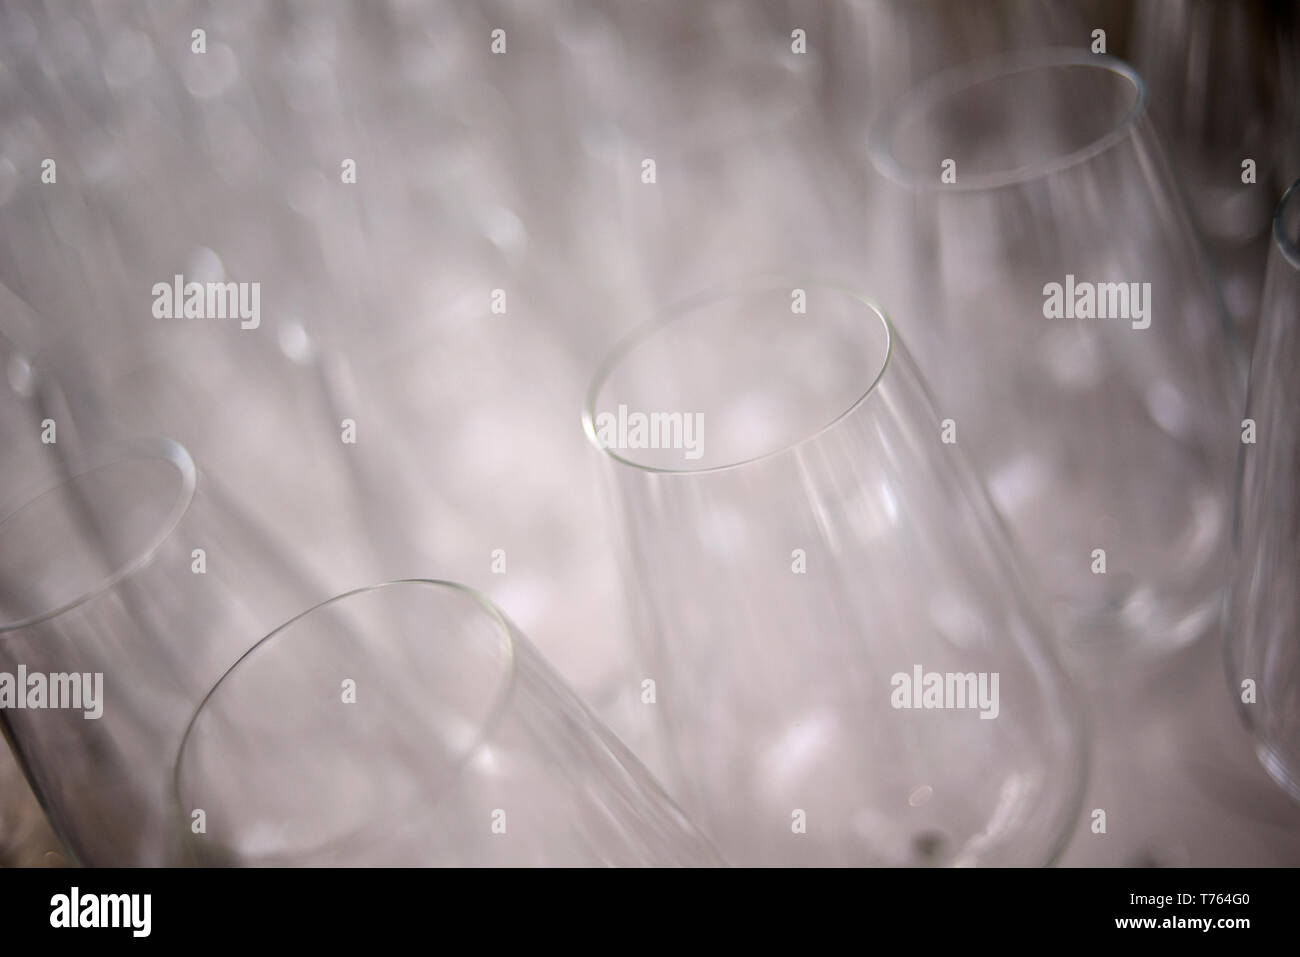 Close up of lots of empty wine glasses displayed on a table Stock Photo